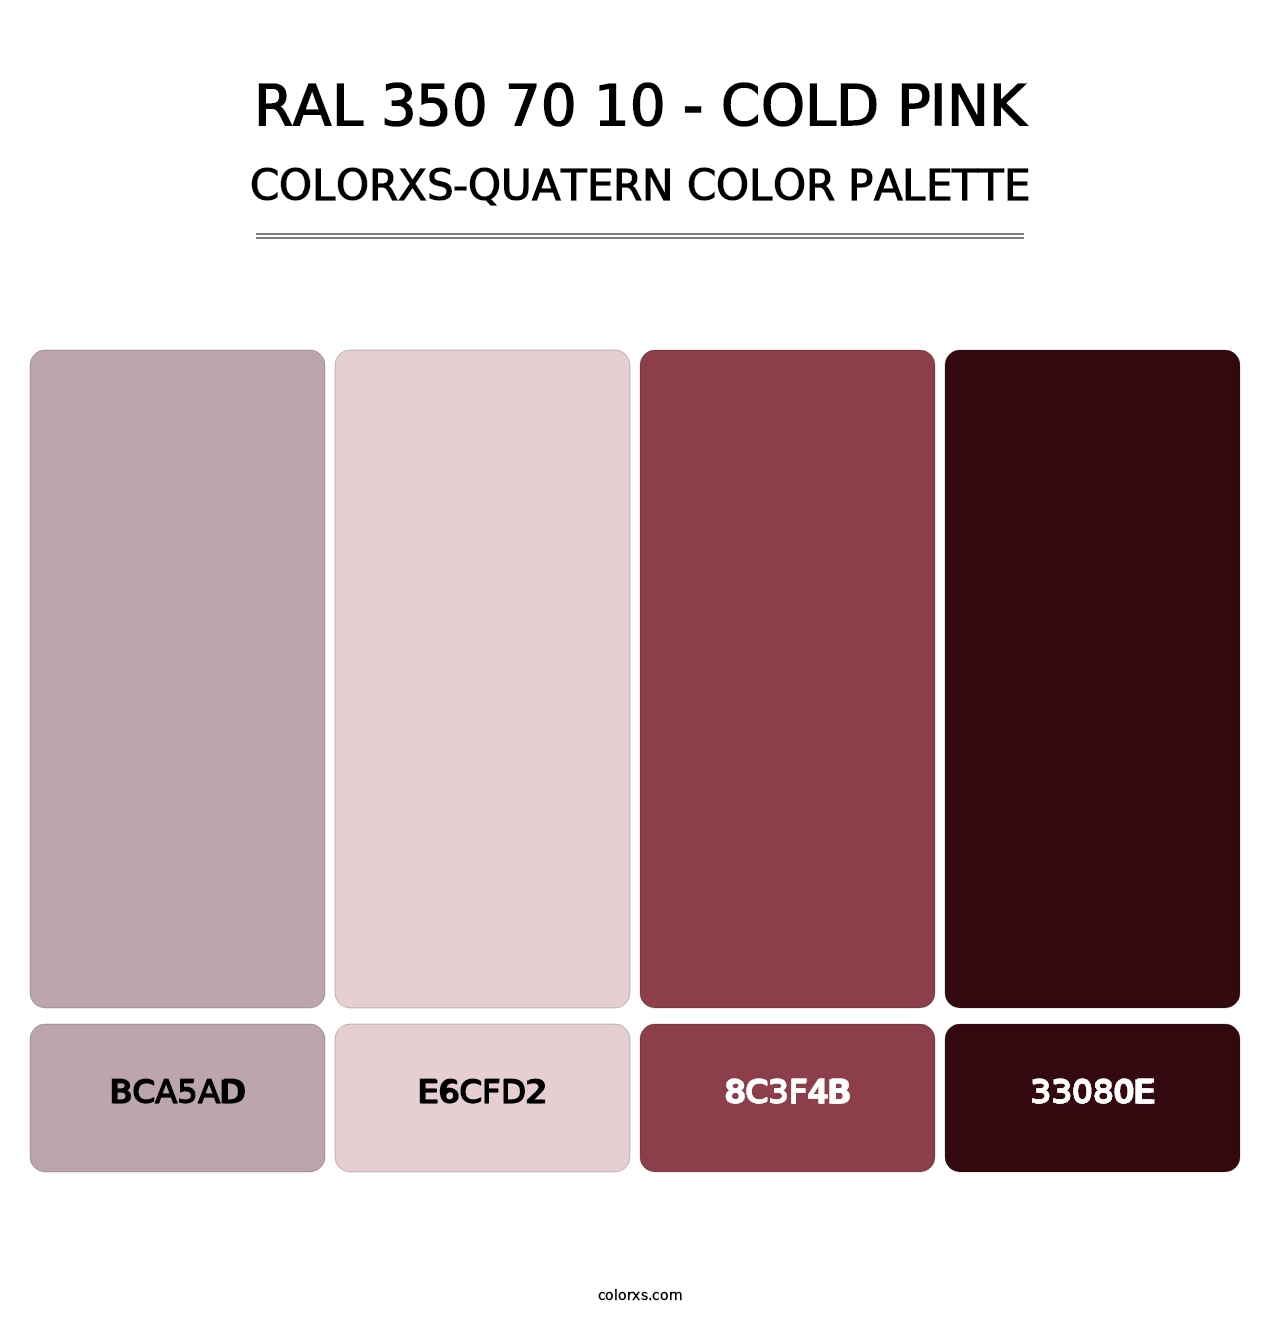 RAL 350 70 10 - Cold Pink - Colorxs Quatern Palette